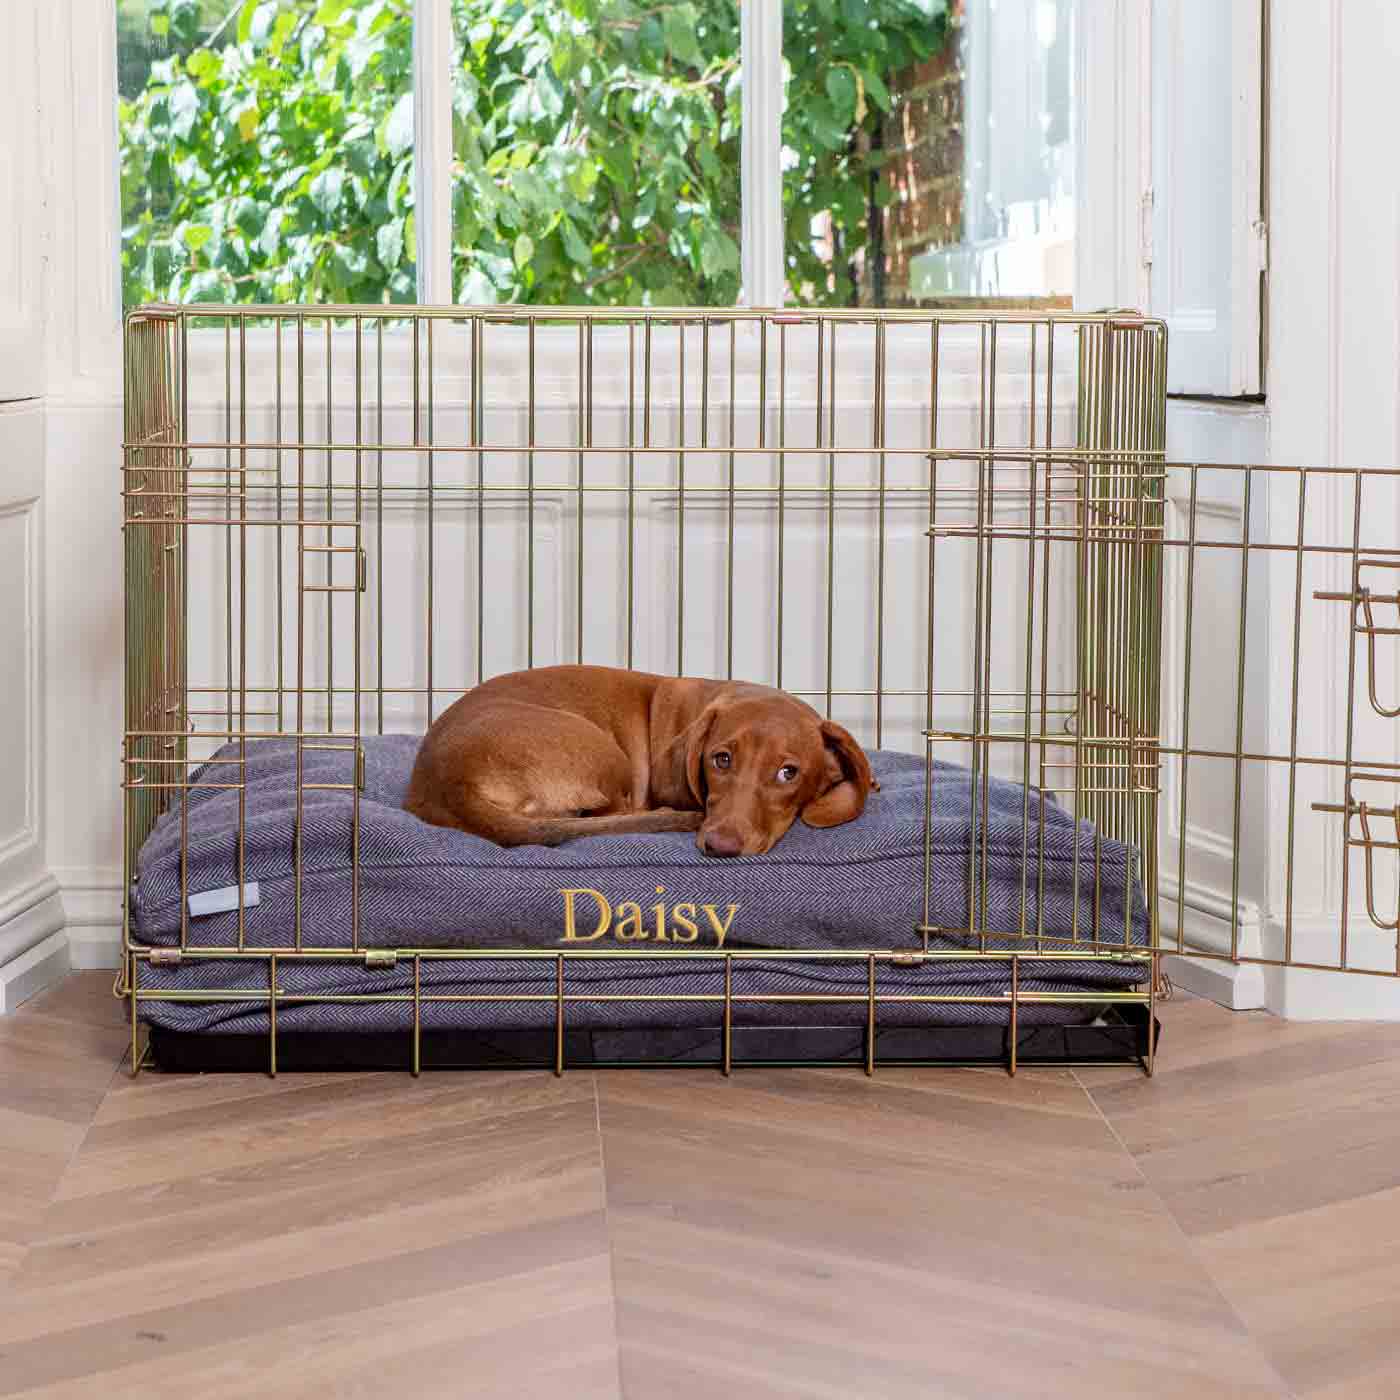 Luxury Dog Cage Cushion, Oxford Herringbone Tweed Cage Cushion The Perfect Dog Cage Accessory, Available To Personalize Now at Lords & Labradors US